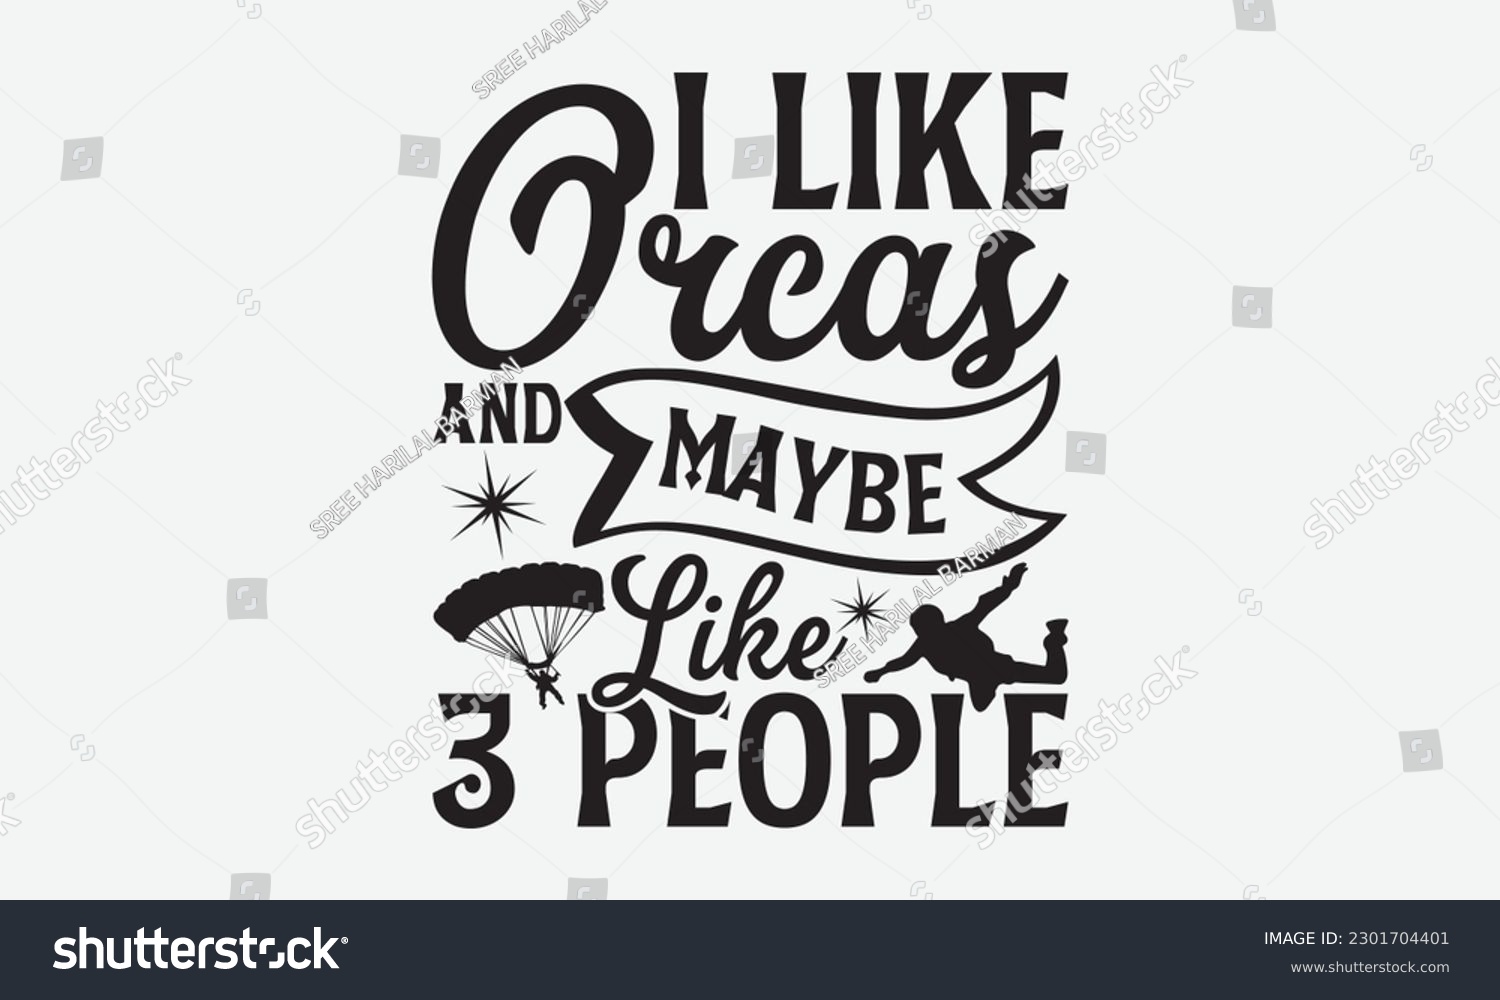 SVG of I Like Orcas and Maybe Like 3 People - Skydiving svg typography T-shirt Design, Hand-drawn lettering phrases, Stickers, Templates, and Mugs. Vector files are editable. EPS 10. svg